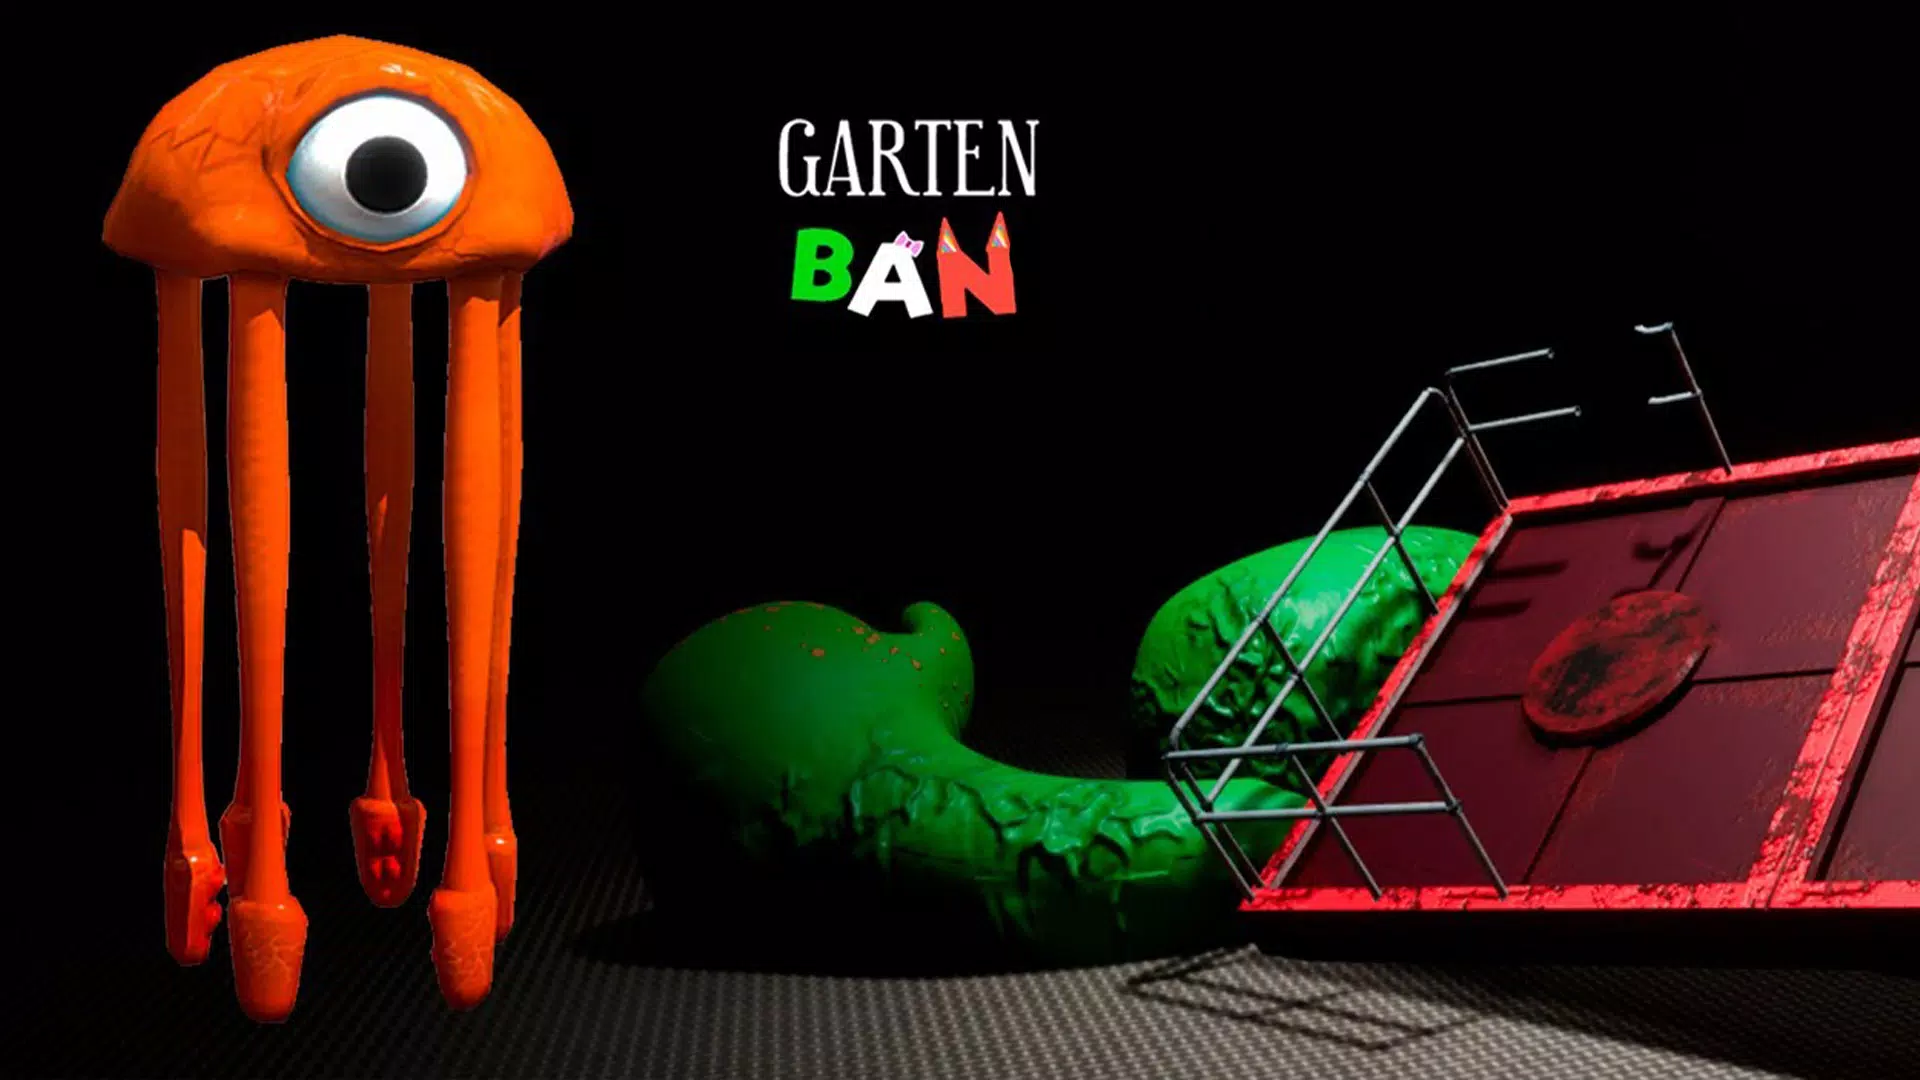 Garten Of BanBan 3 APK 2.1 Free Download For Android